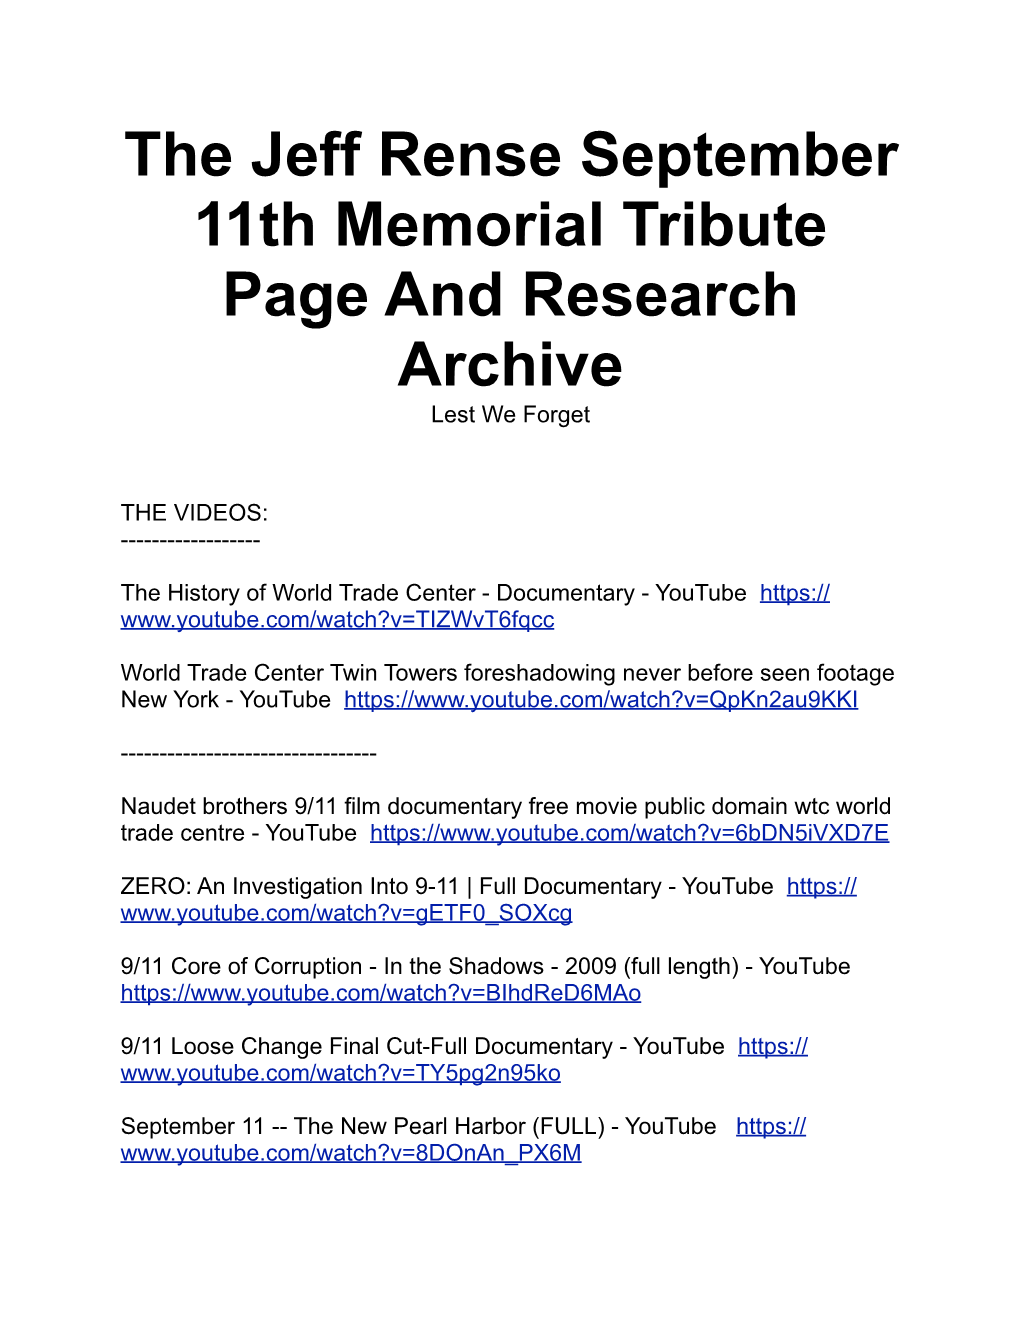 The Jeff Rense September 11Th Memorial Tribute Page and Research Archive Lest We Forget